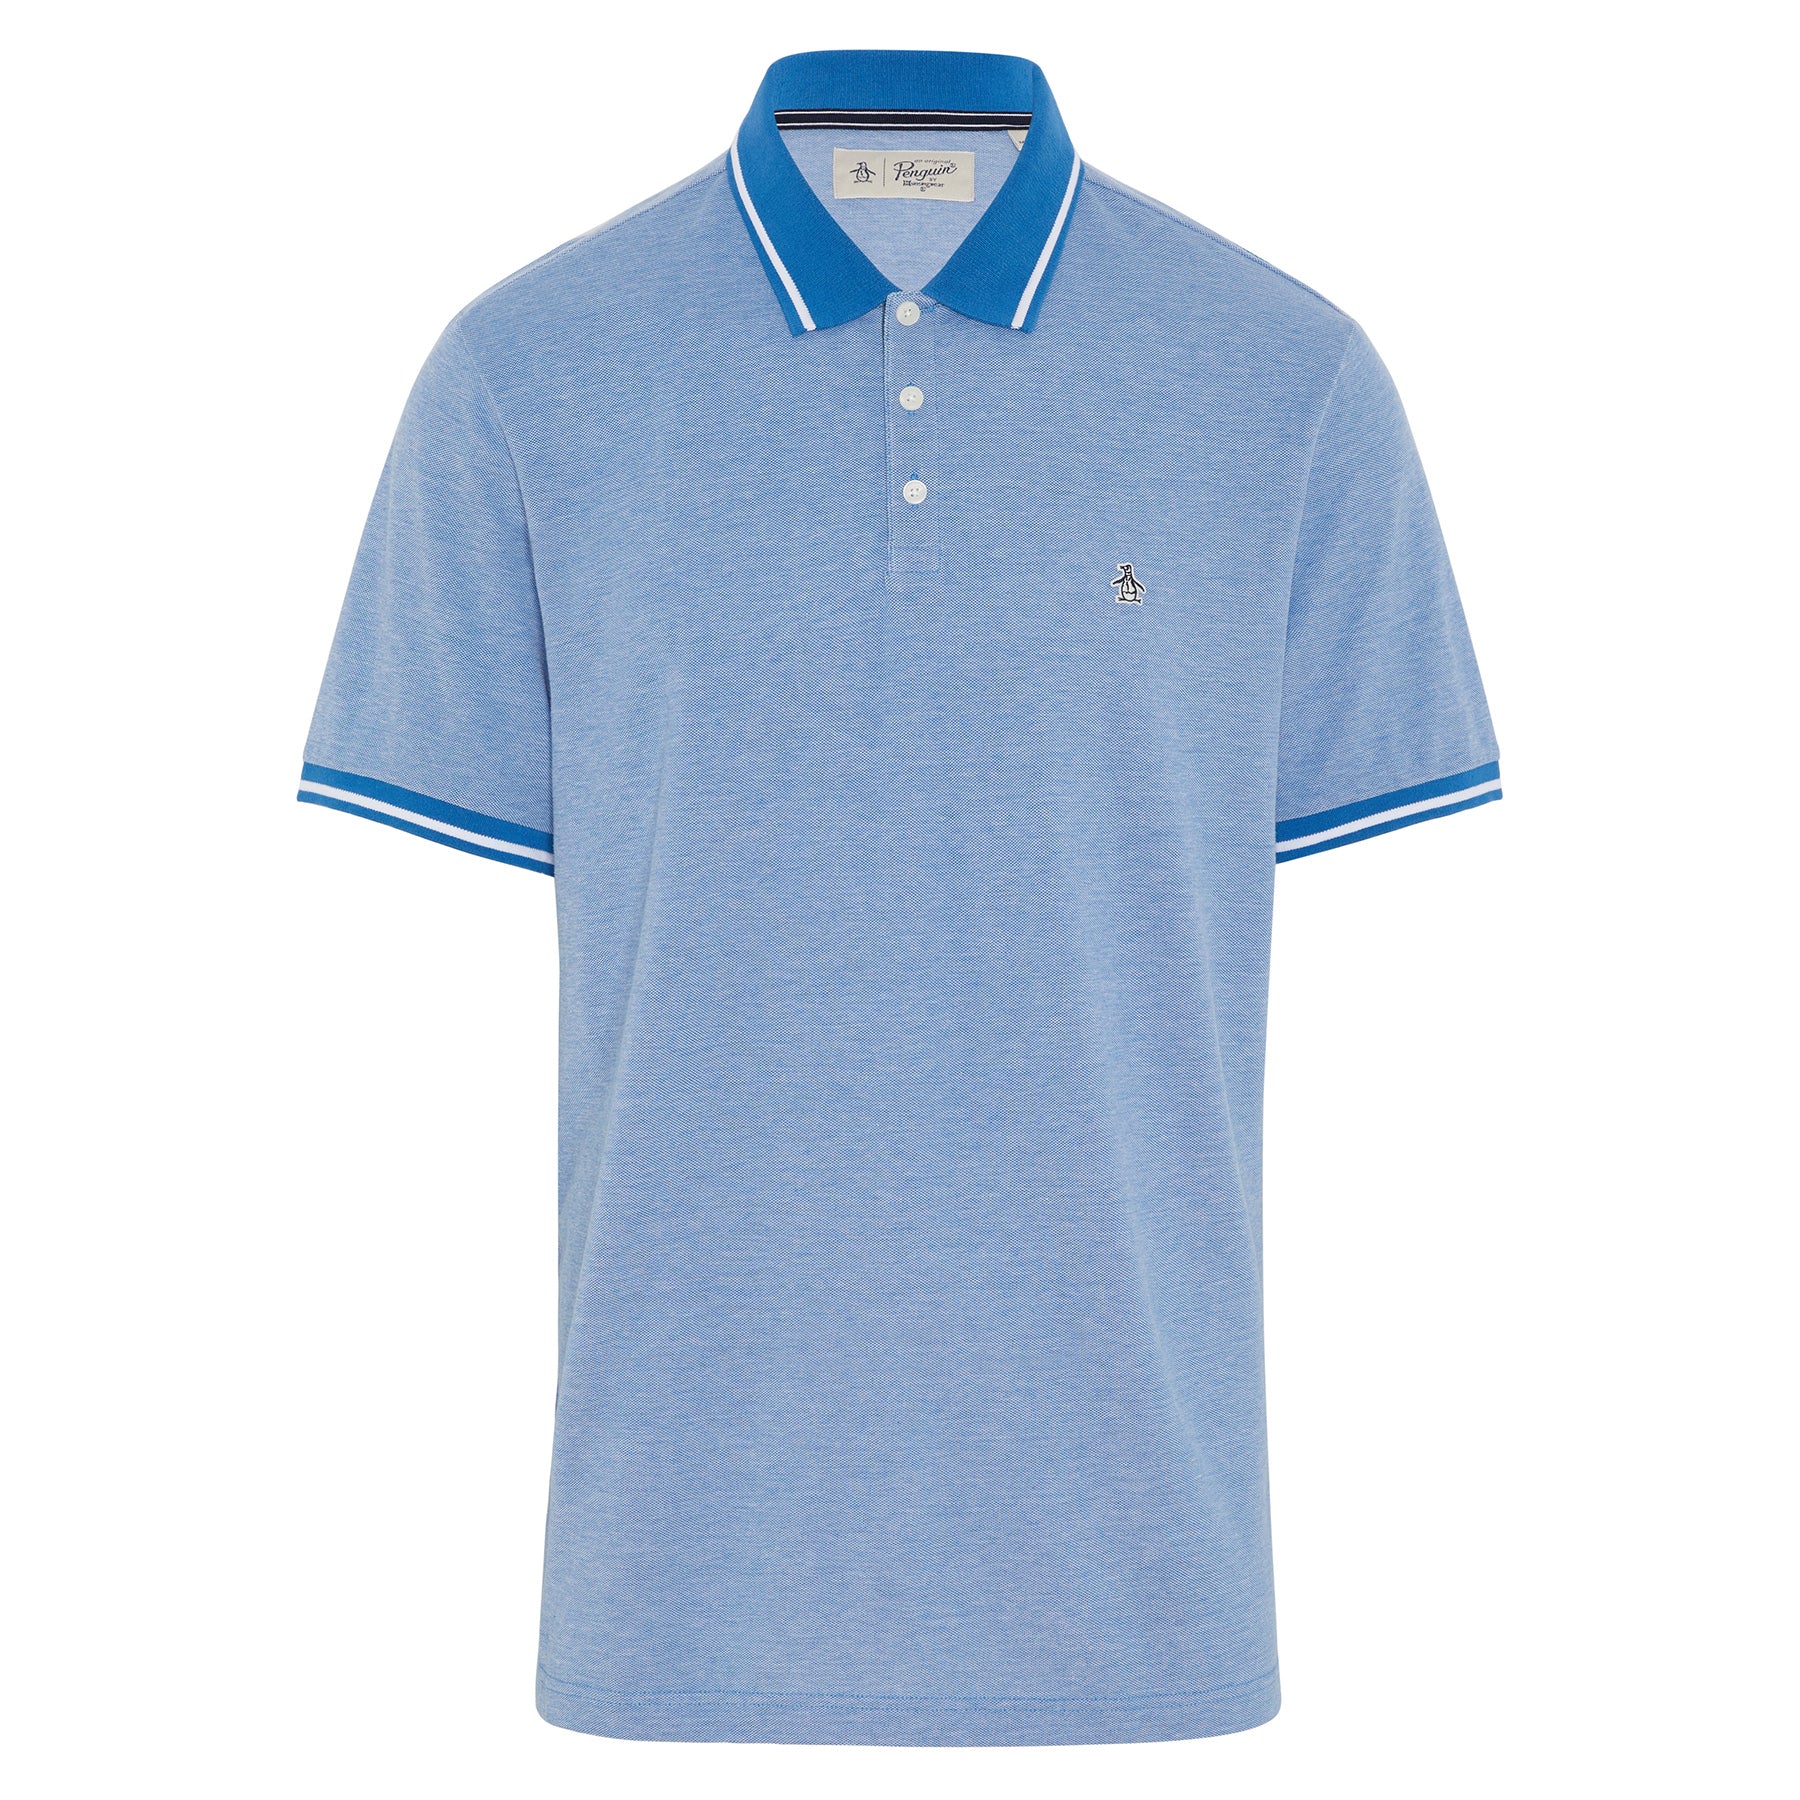 View Birdseye Pique Tipped Polo Shirt In Star Sapphire information